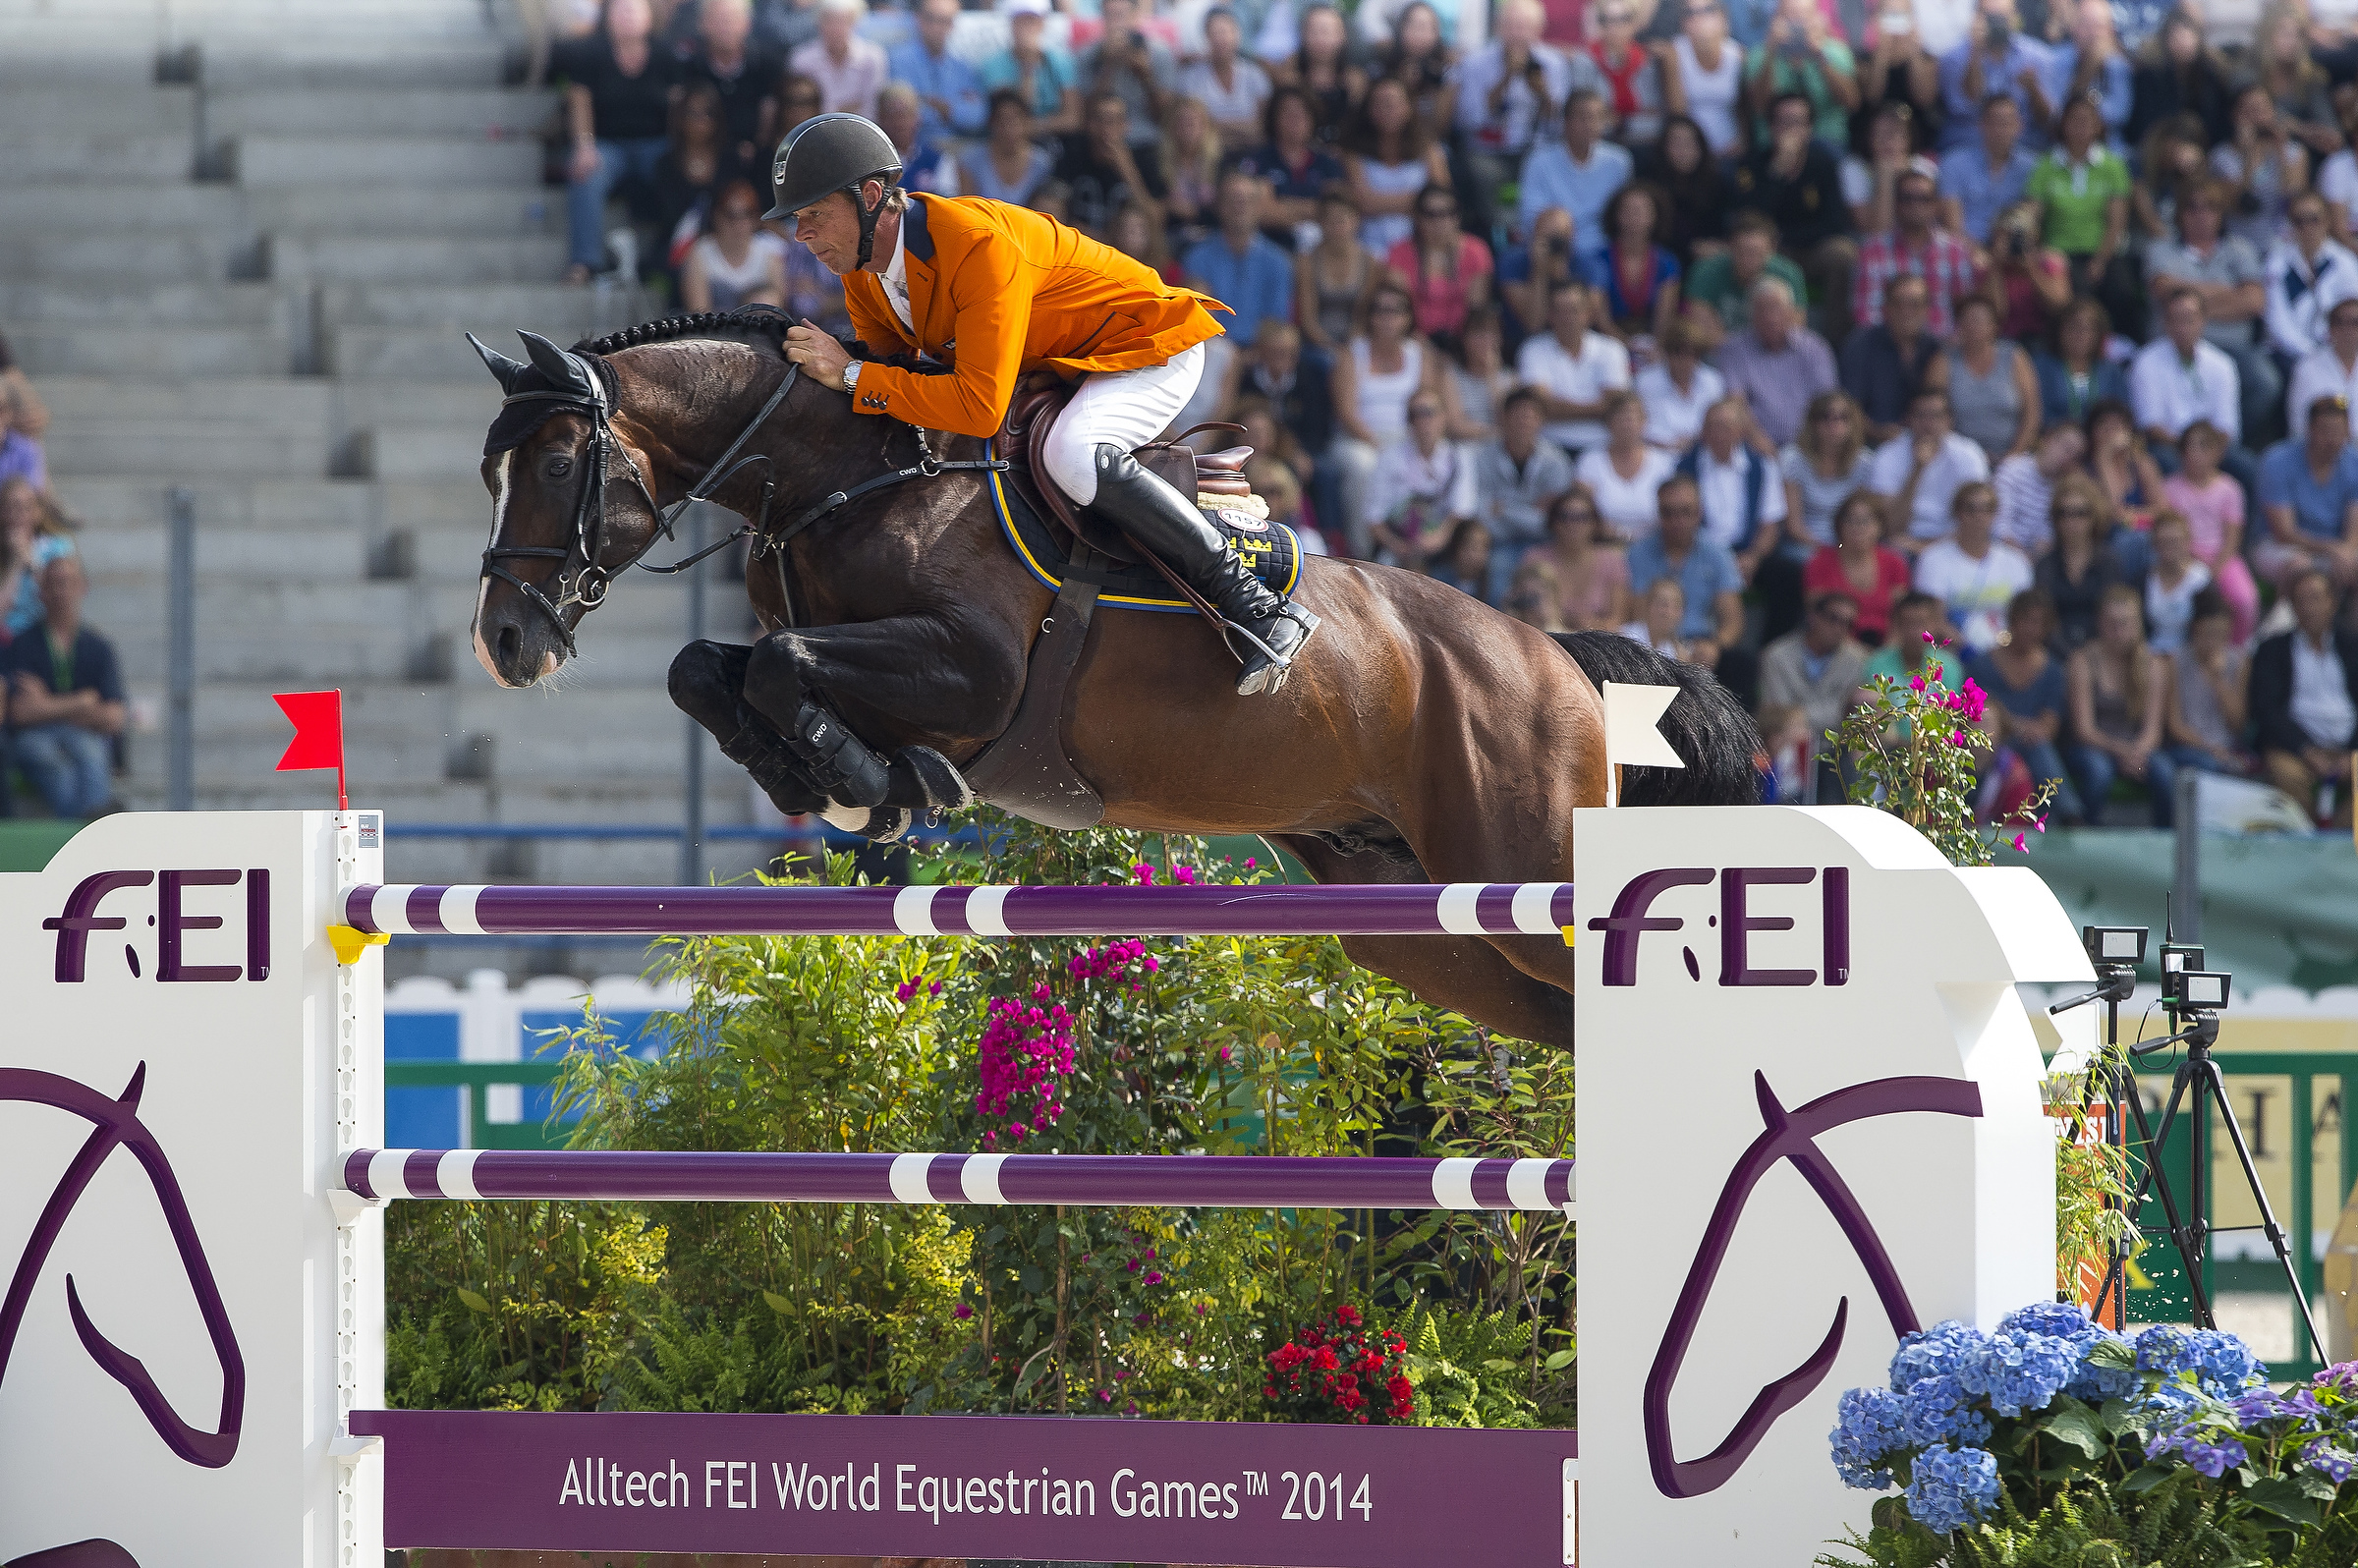 FEI Awards 2014 nominee Jeroen Dubbeldam, double gold medallist at the Alltech FEI World Equestrian Games and a member of the winning team at the Furusiyya FEI Nations Cup Final (FEI/Leanjo de Koster)